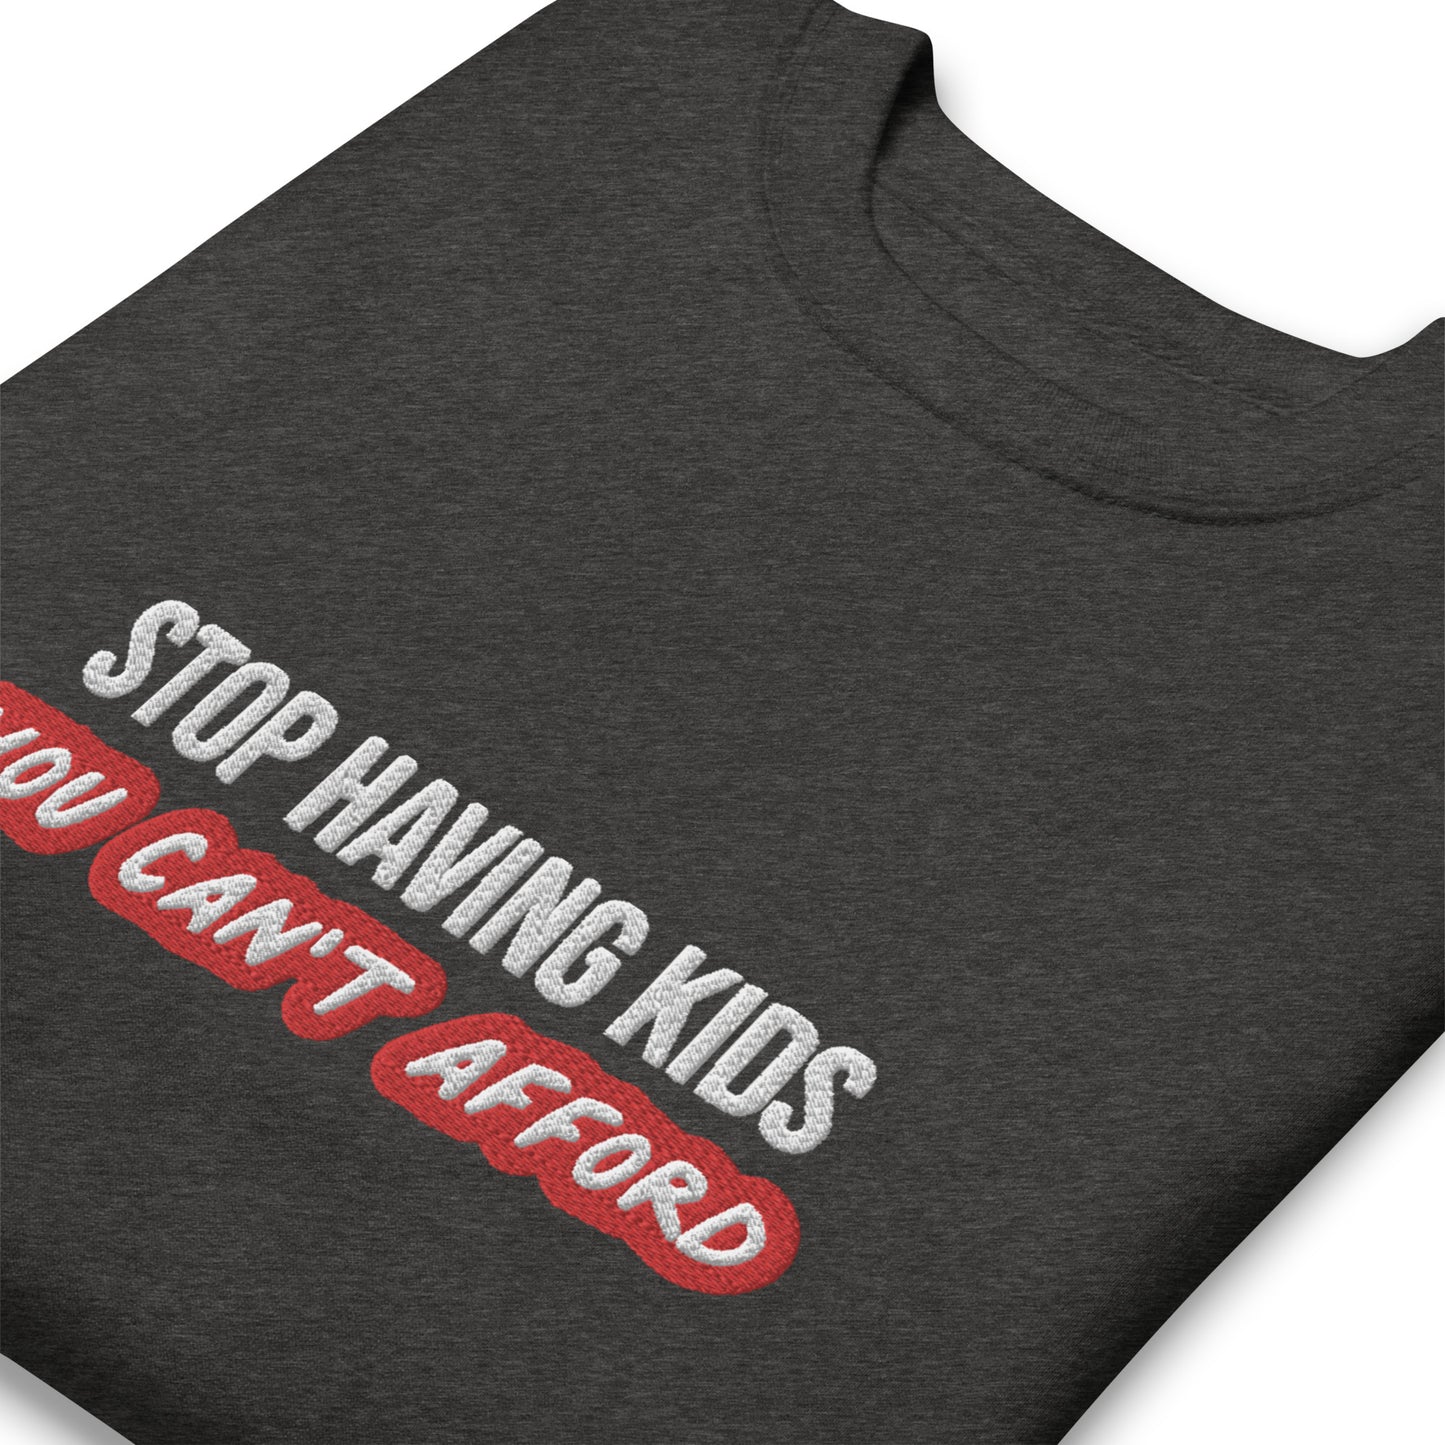 Stop Having Kids You Can't Afford Embroidered Unisex Sweatshirt